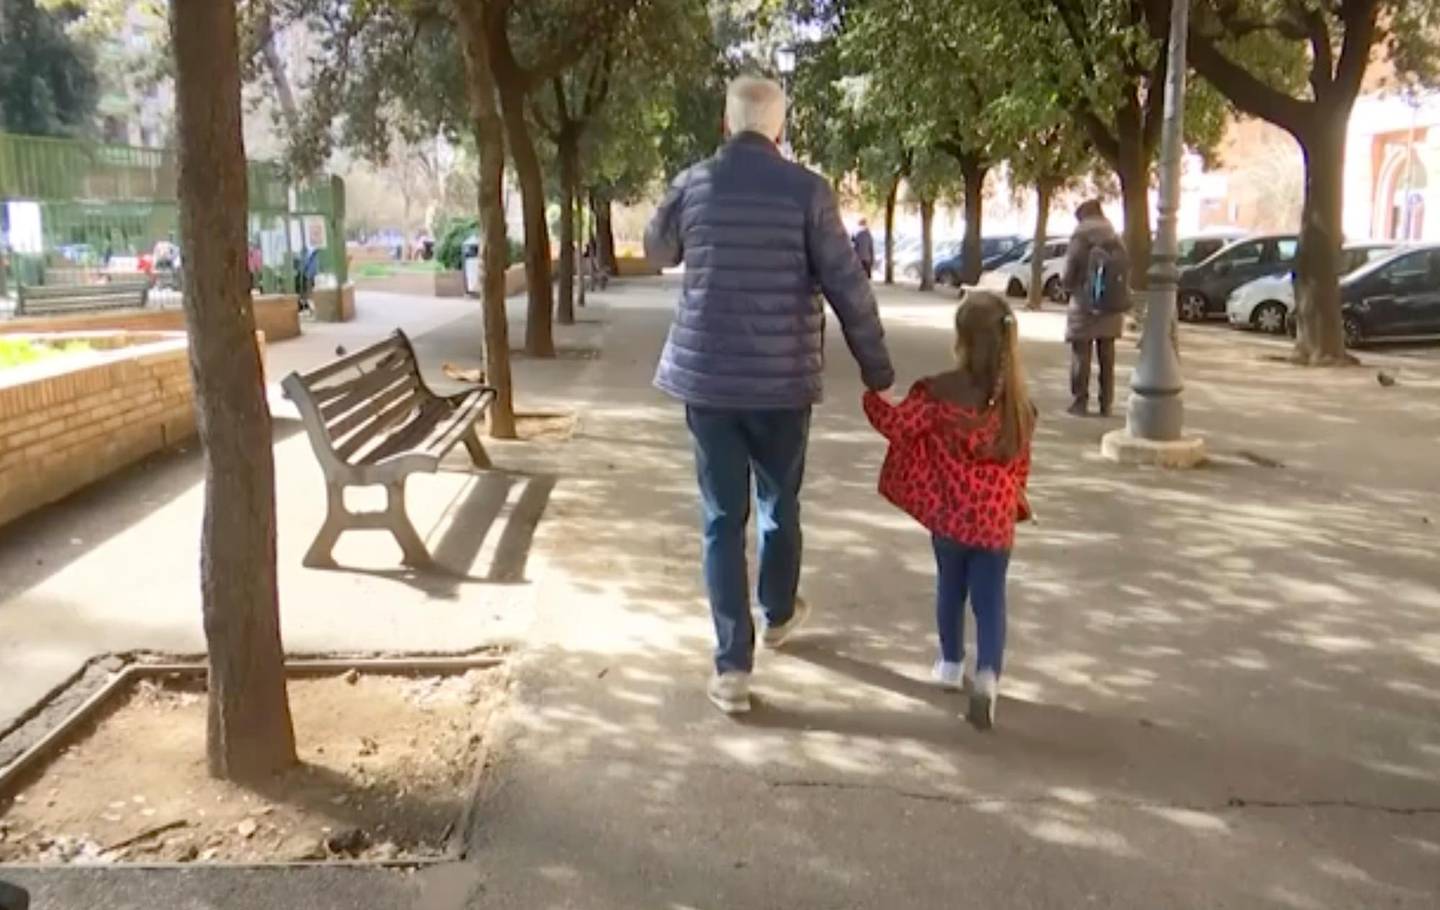 A young girl walk with her elderly grandparent along a tree lined avenue in Rome, Italy, Thursday March 5, 2020, after the Italian government closed all schools to assist in the fight against the COVID-19 virus. Some of the most vulnerable people, grandparents, have been forced to face possible virus infection as they look after young family members in playgrounds and parks in the city.(AP Photo)